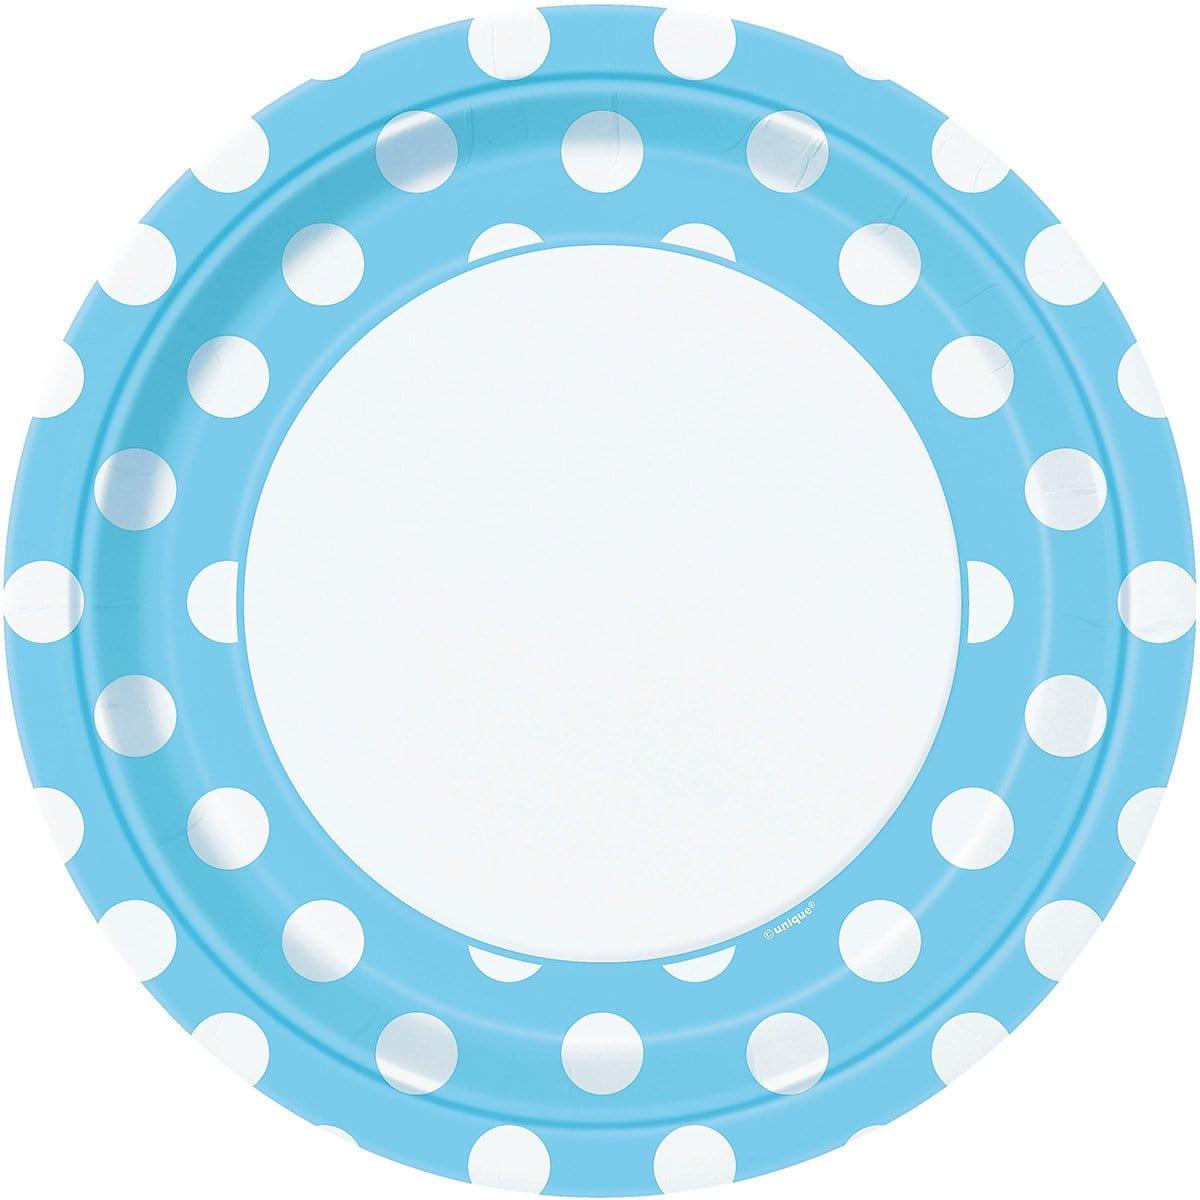 Buy Baby Shower Powder Blue Dots paper plates 9 inches, 8 per package sold at Party Expert